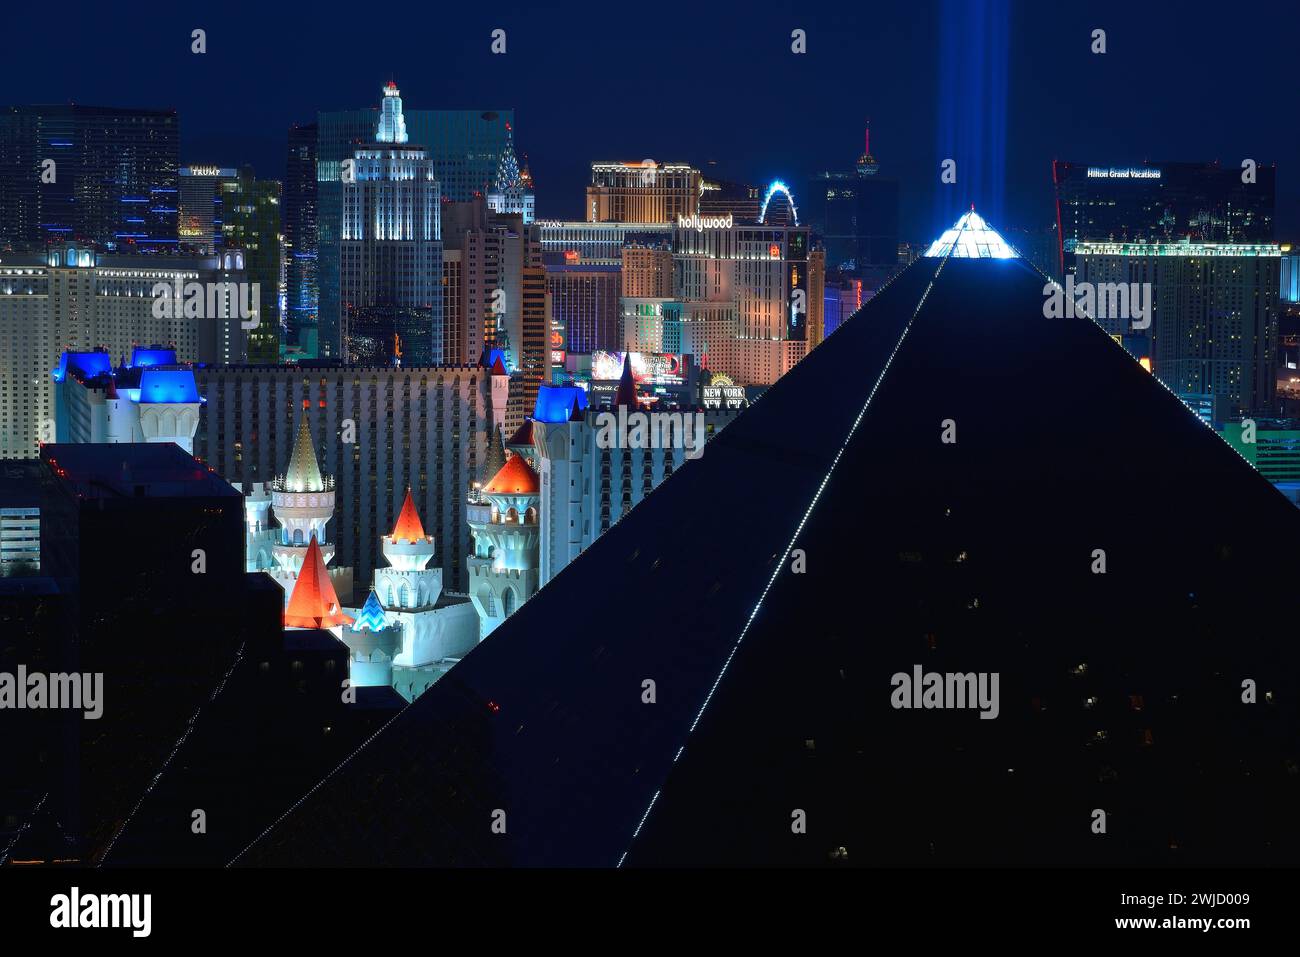 The Luxor hotel and the South Strip skyline during twilight, Las Vegas NV (seen from the Delano hotel) Stock Photo